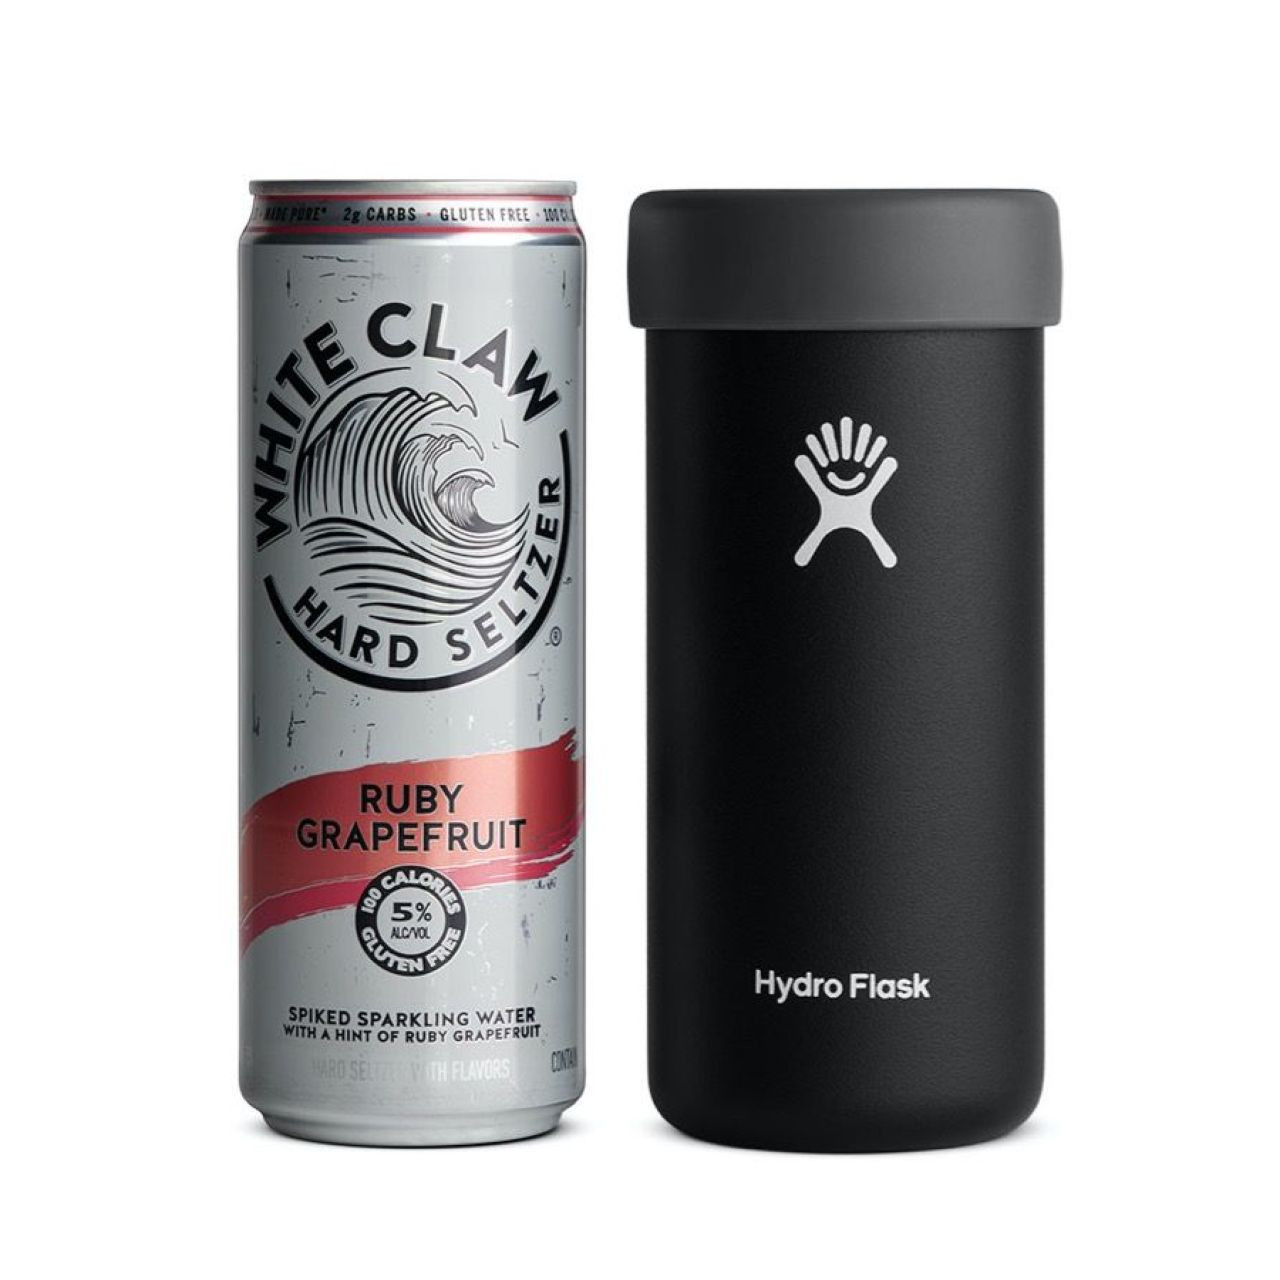 This Hydro Flask Keeps Tallboy Cans Chilled